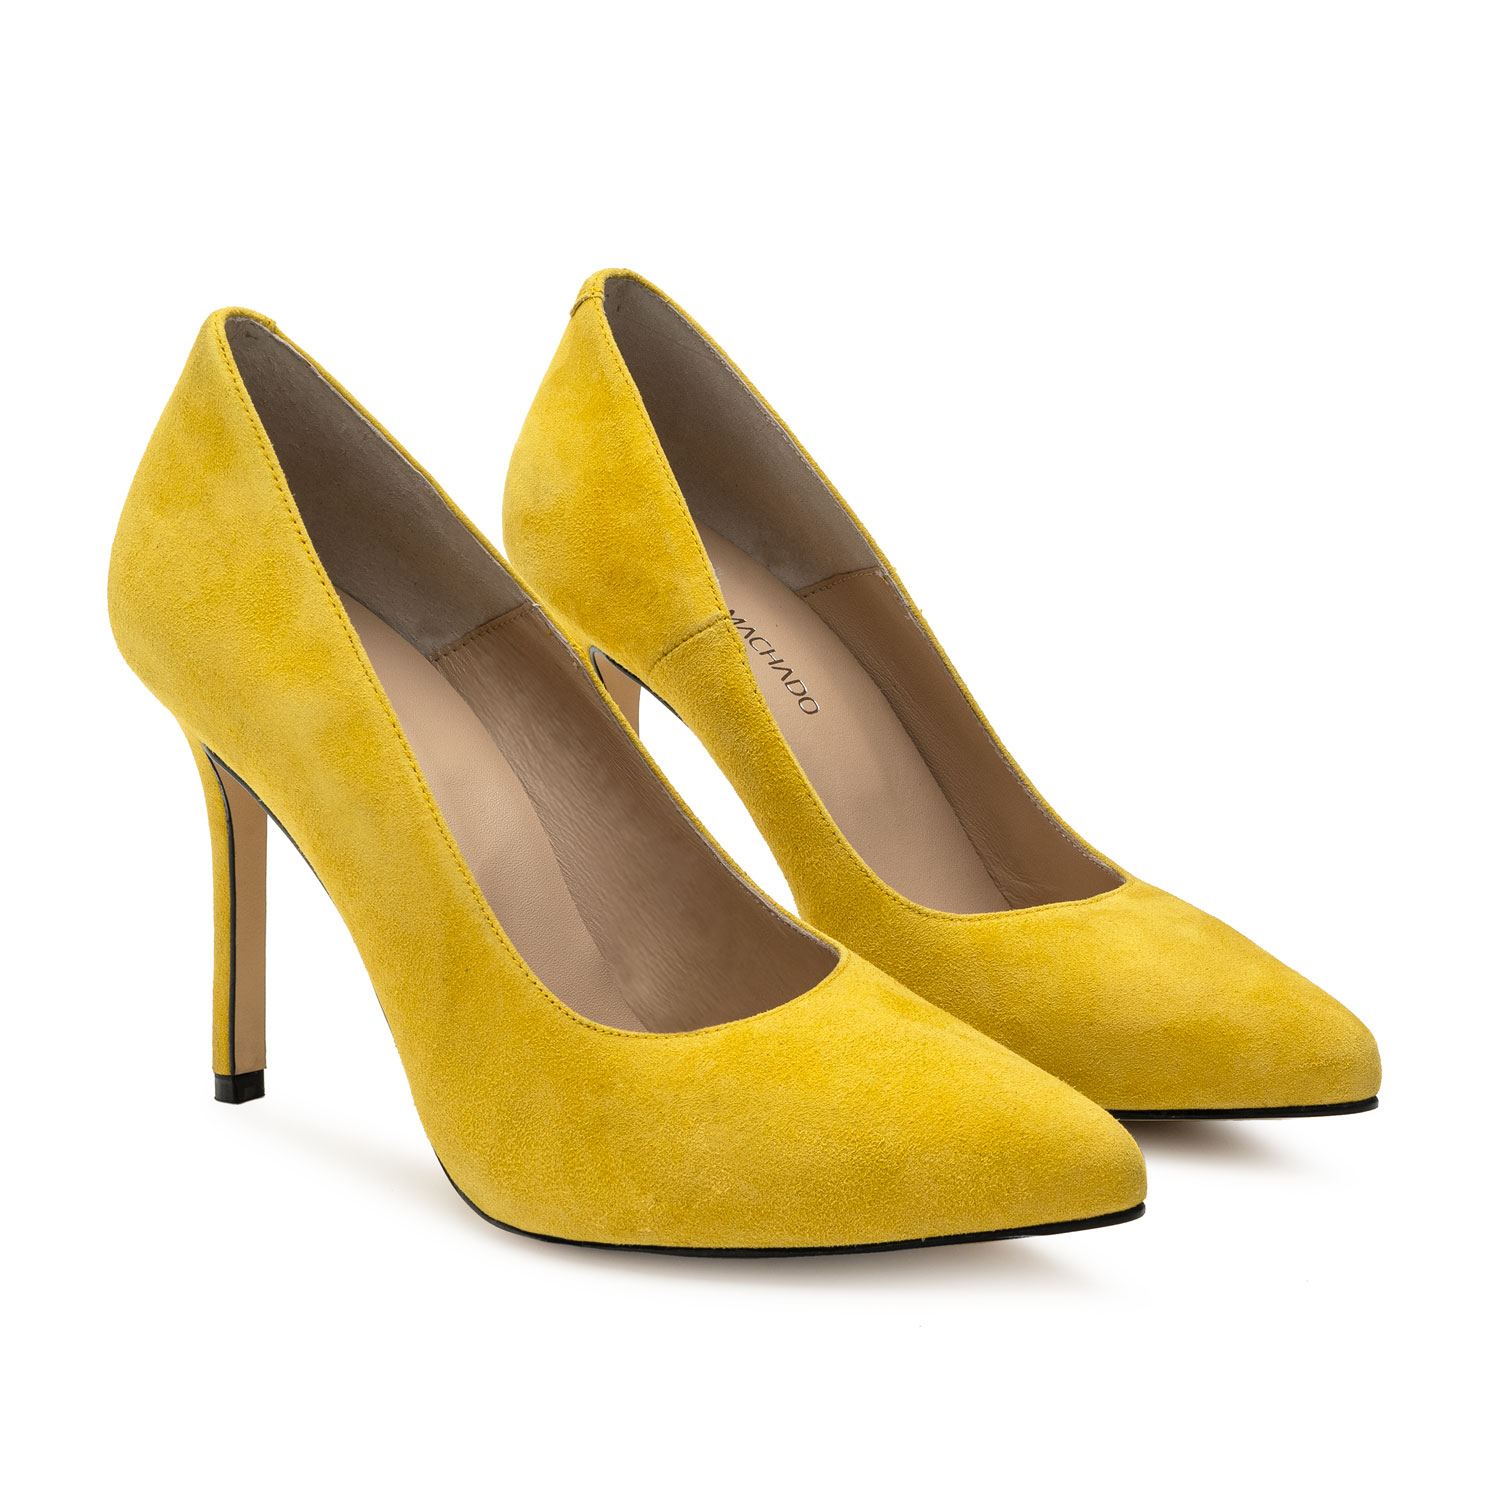 Heeled Shoes in Yellow Suede 